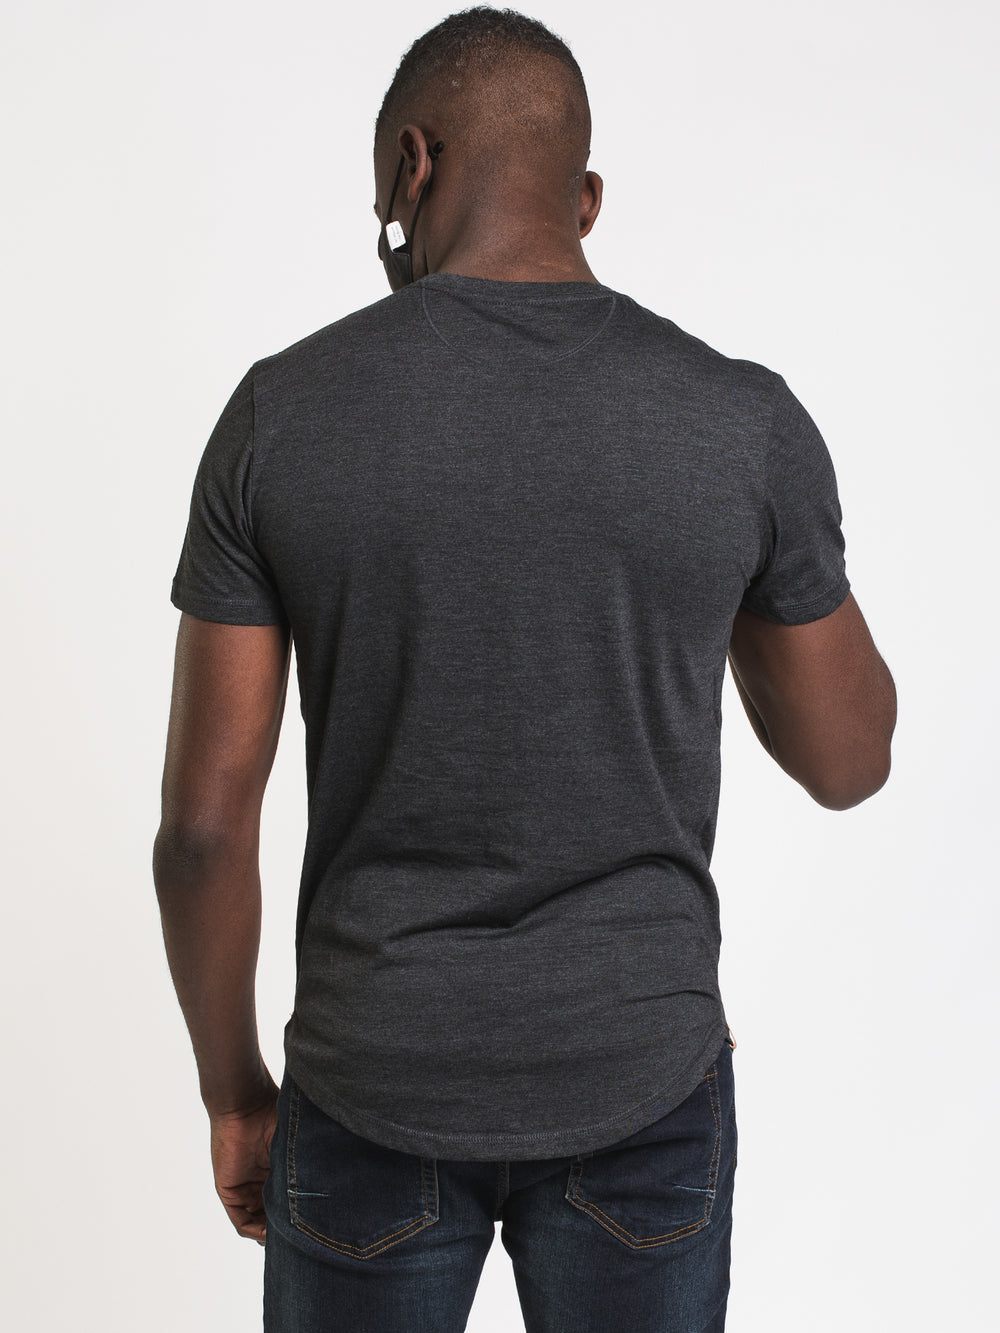 TENTREE EMBROIDERED POCKET T-SHIRT  - CLEARANCE